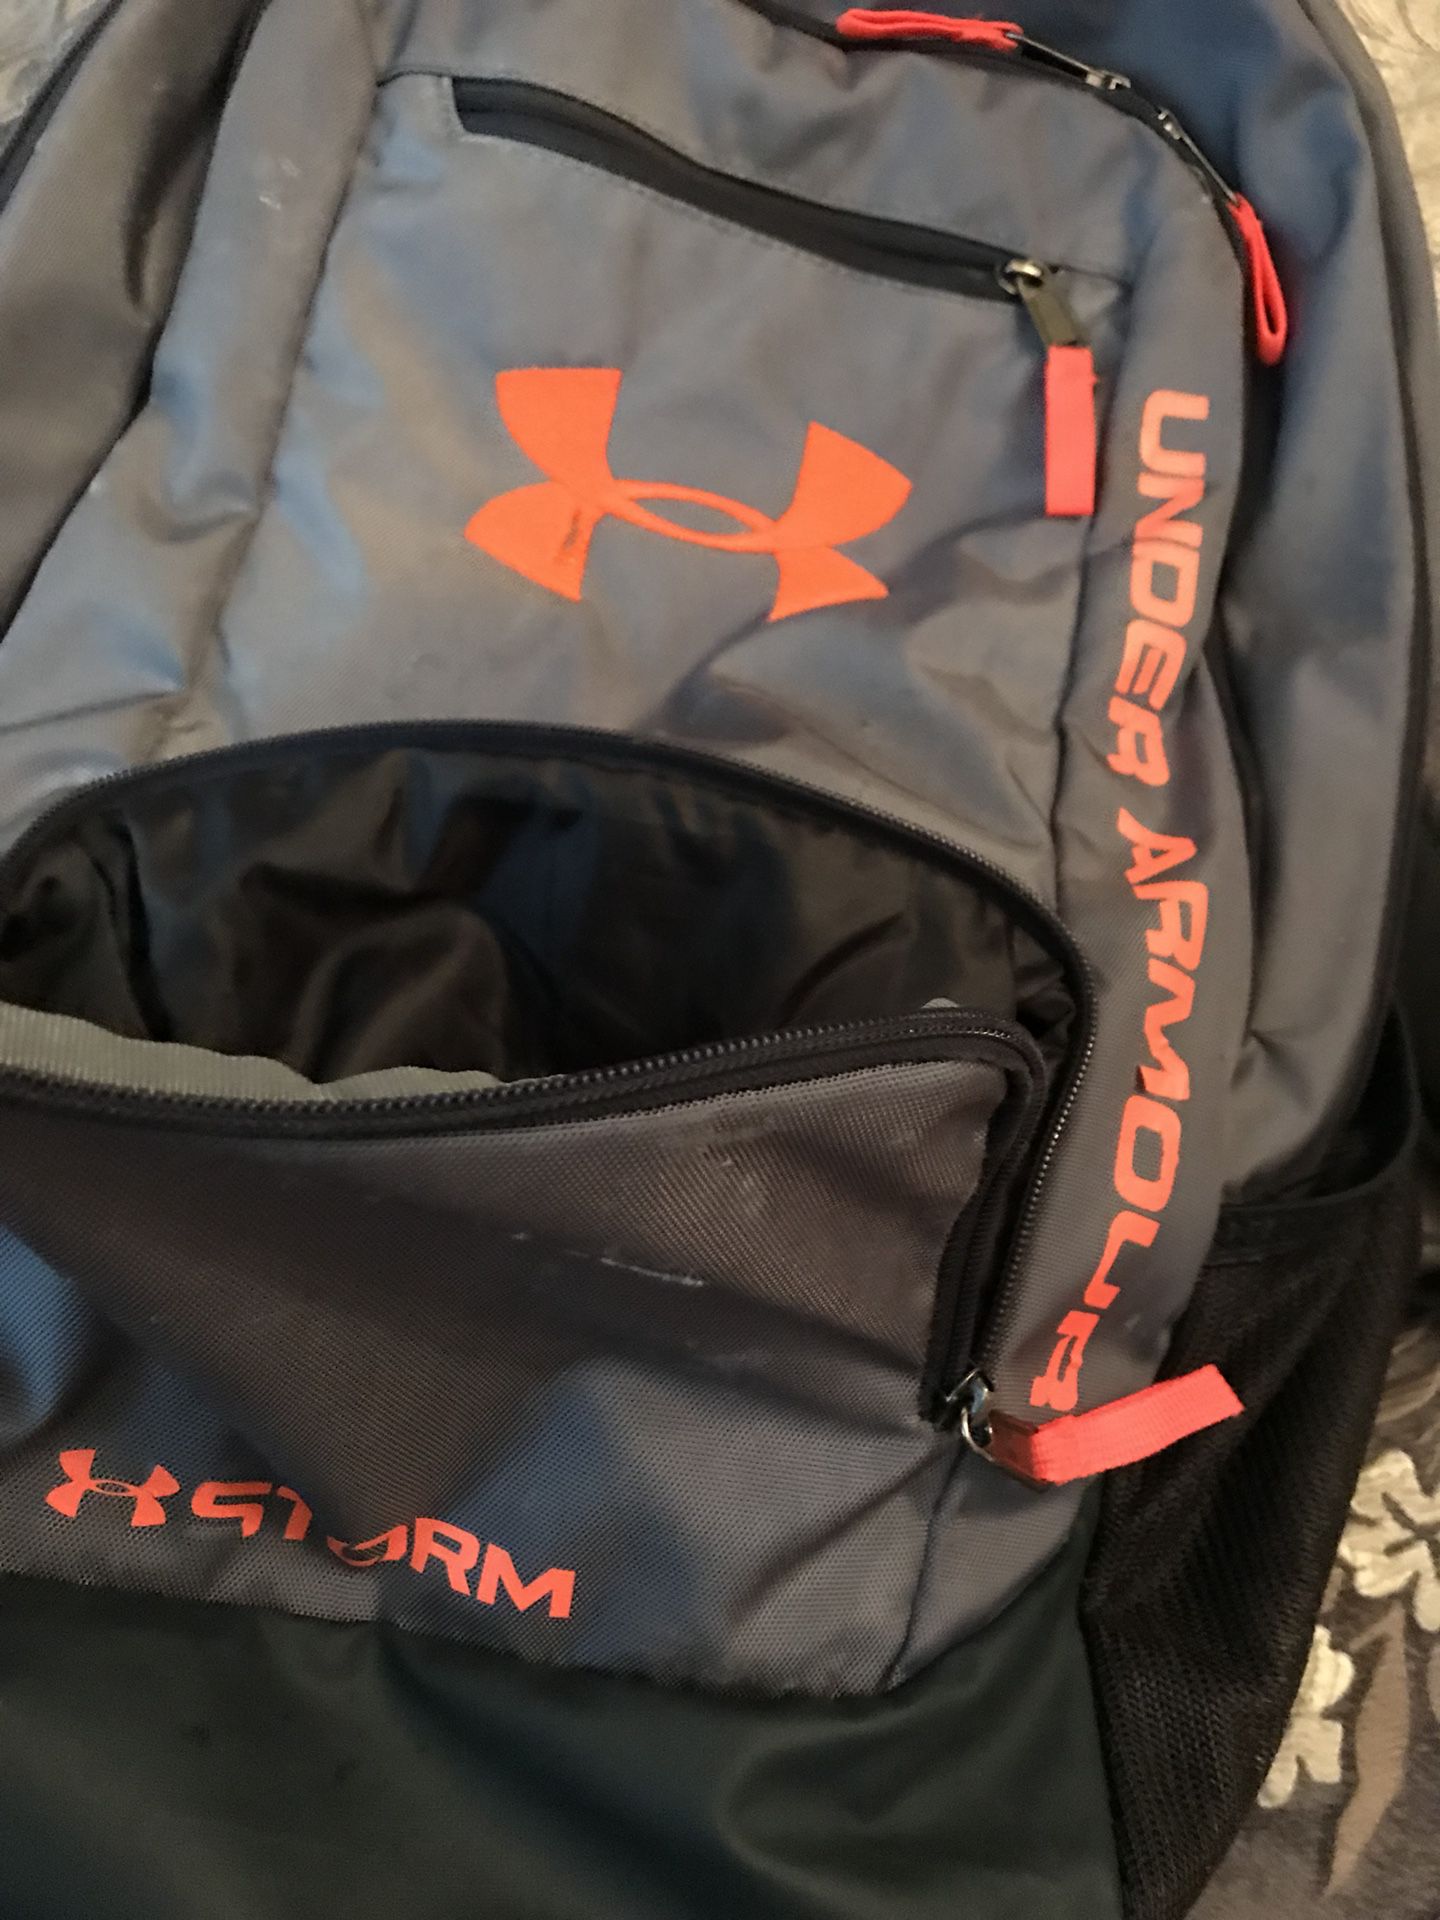 Under Armour Teal Backpack Gray - $26 (48% Off Retail) - From Ana